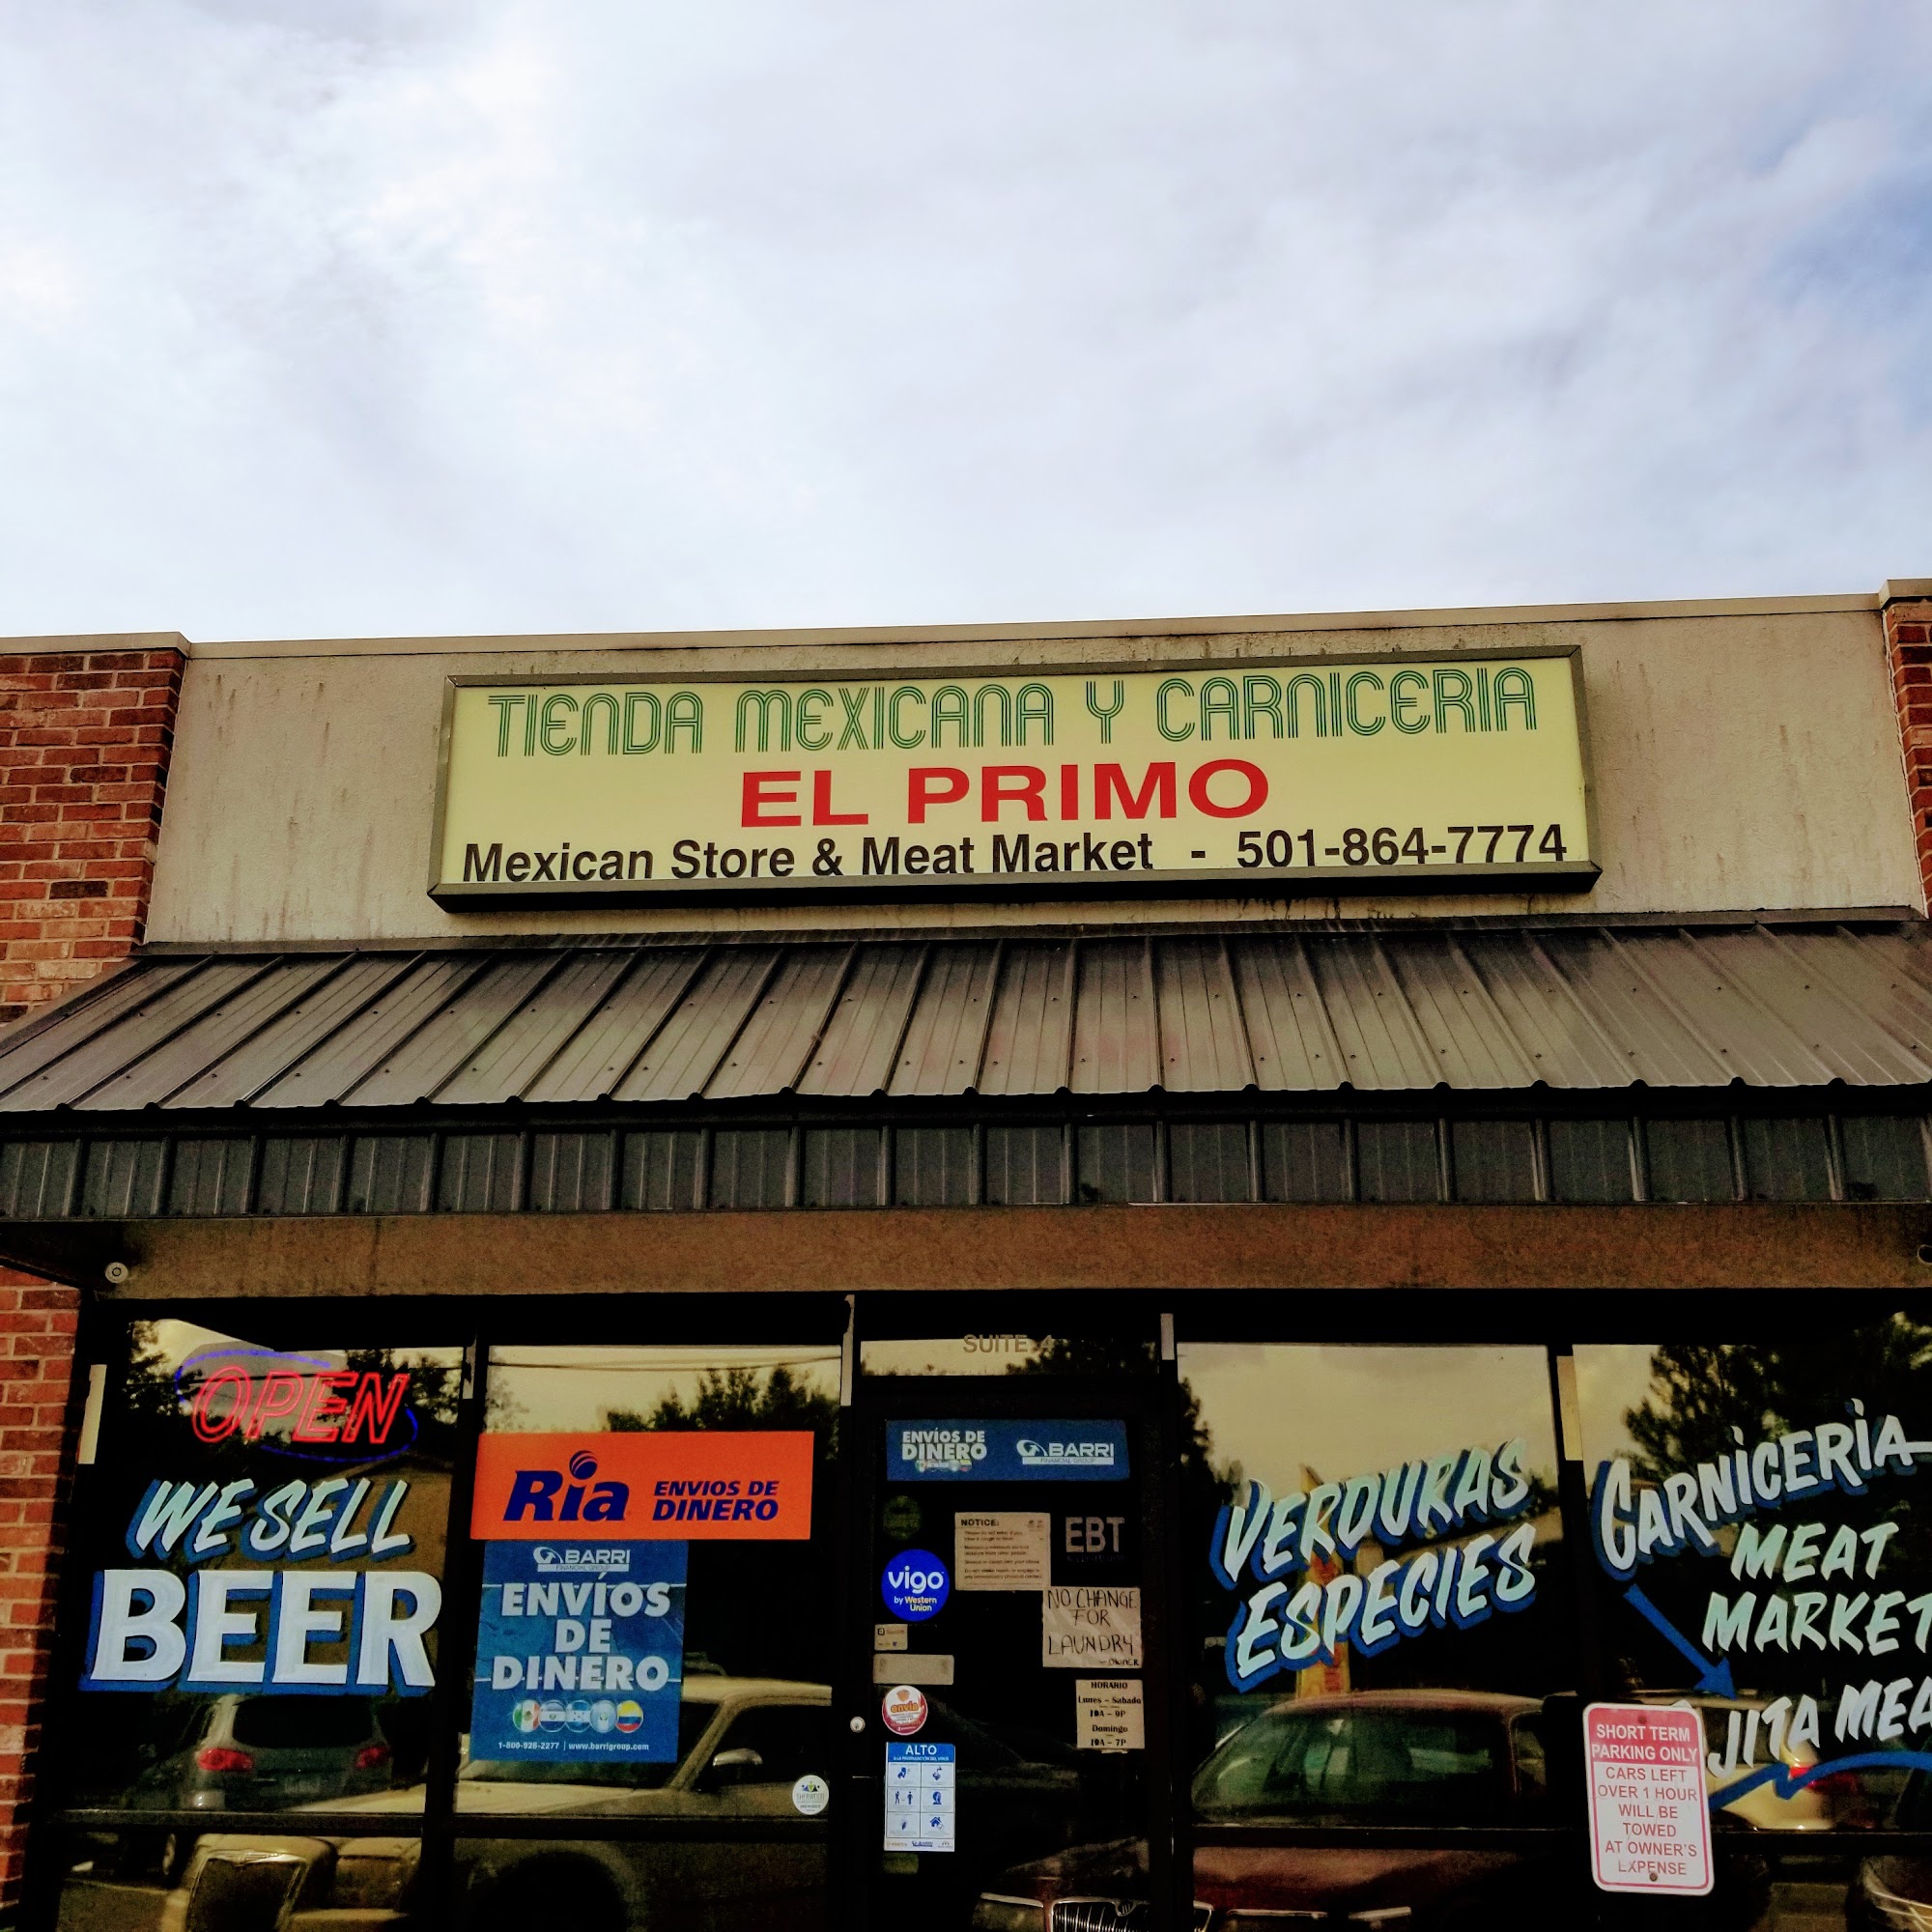 El Primo Mexican Store and Carniceria